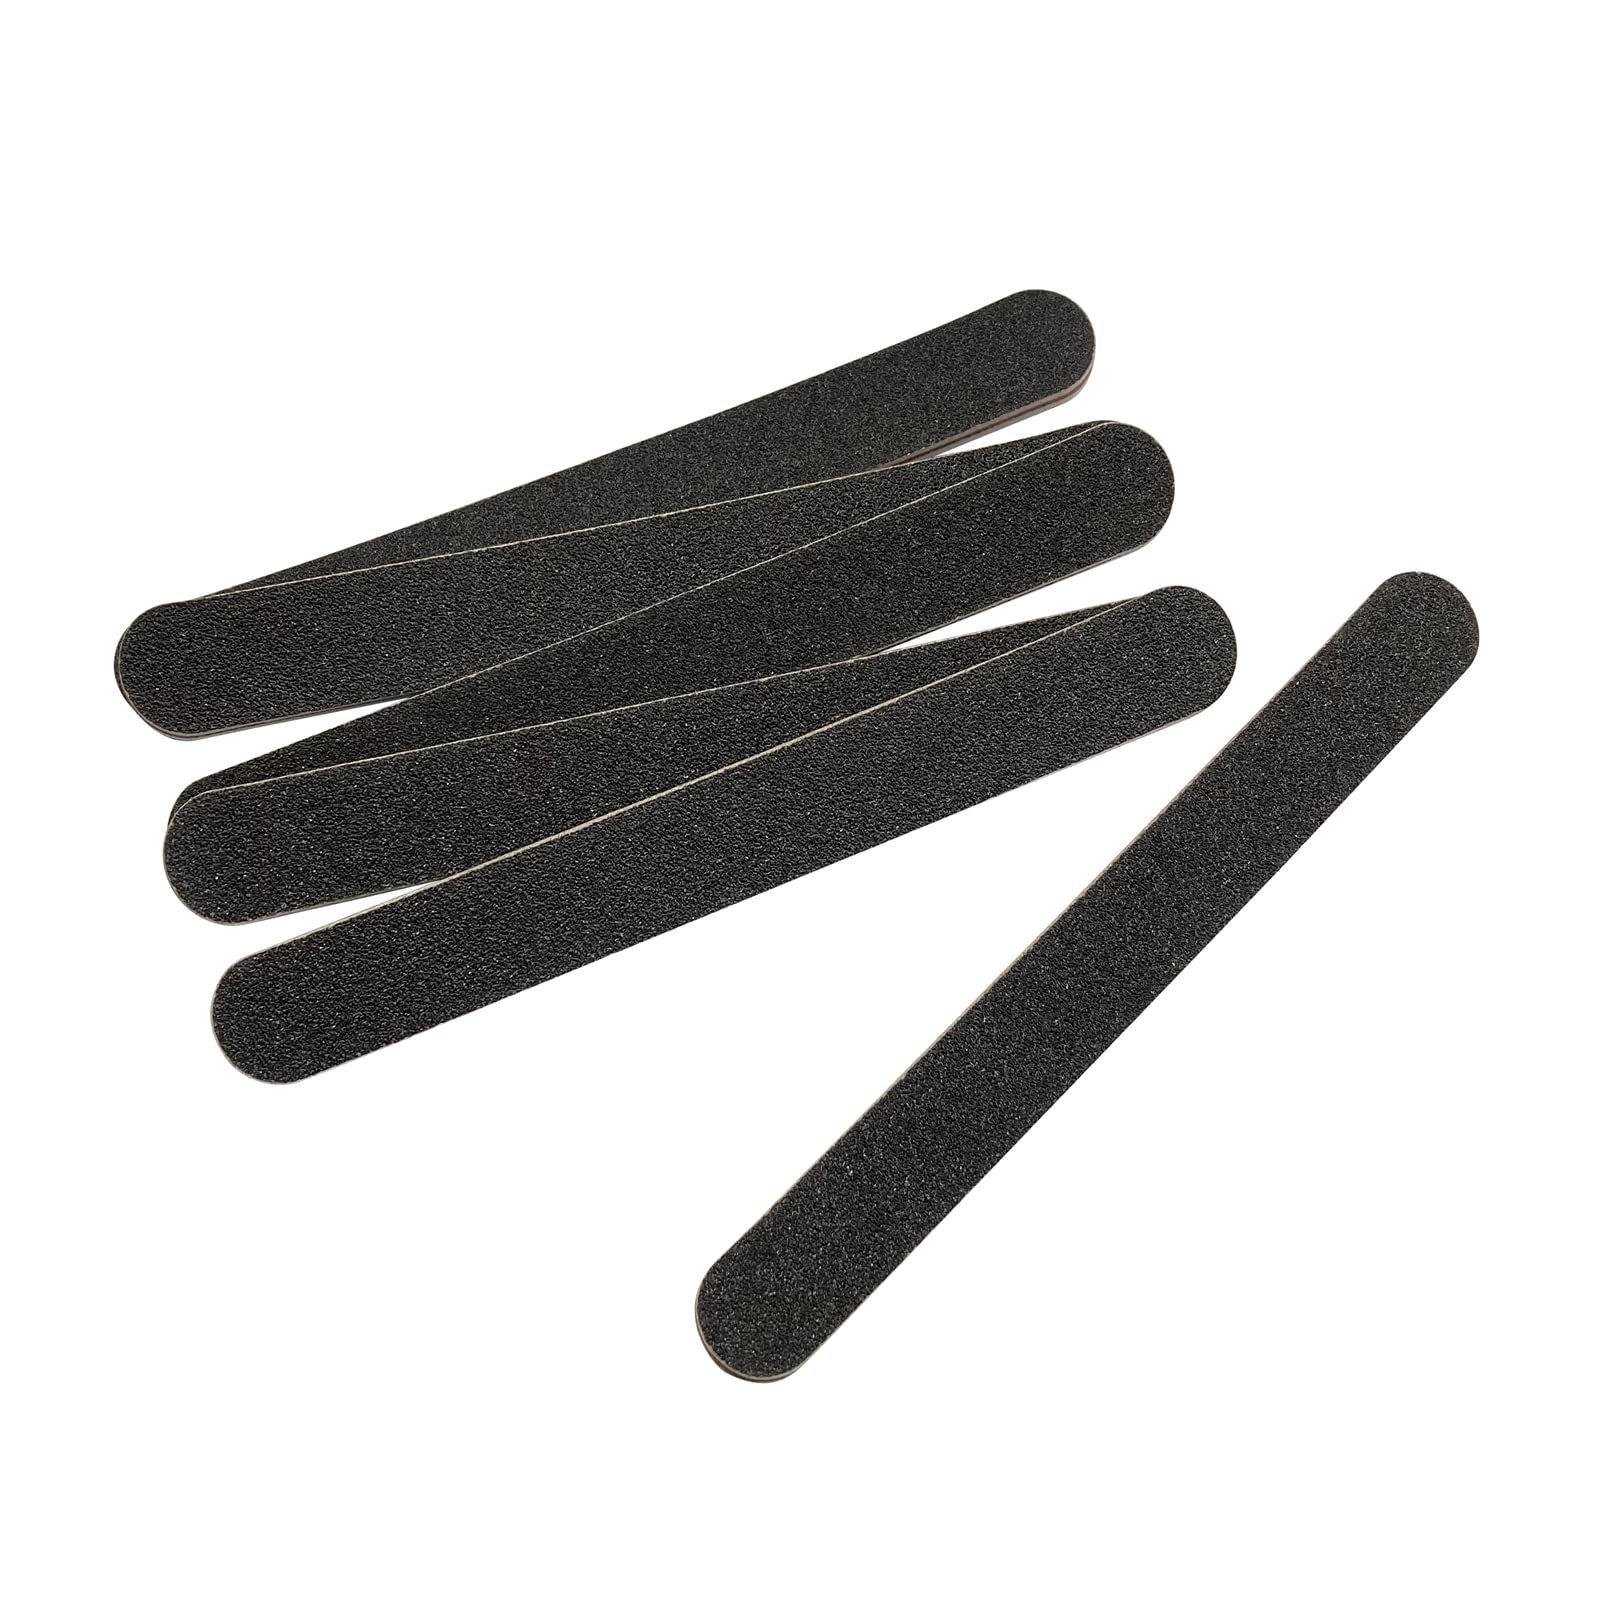 Nail Files Double Sided 100/180 Grit Emery Board Manicure Pedicure Tool  4